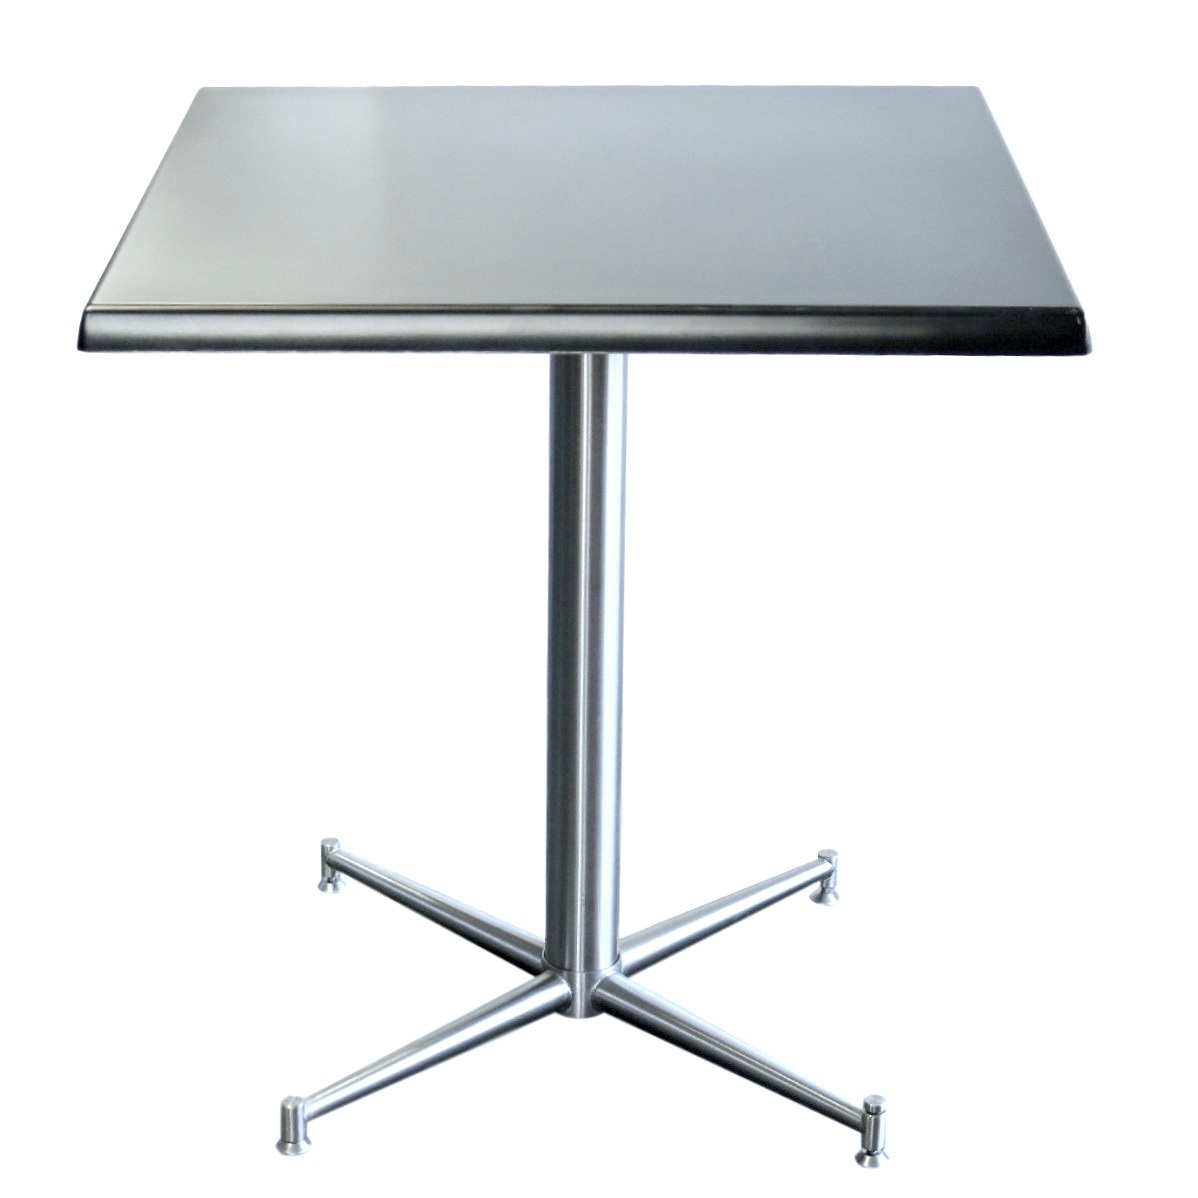 Stirling Table Base Square Table